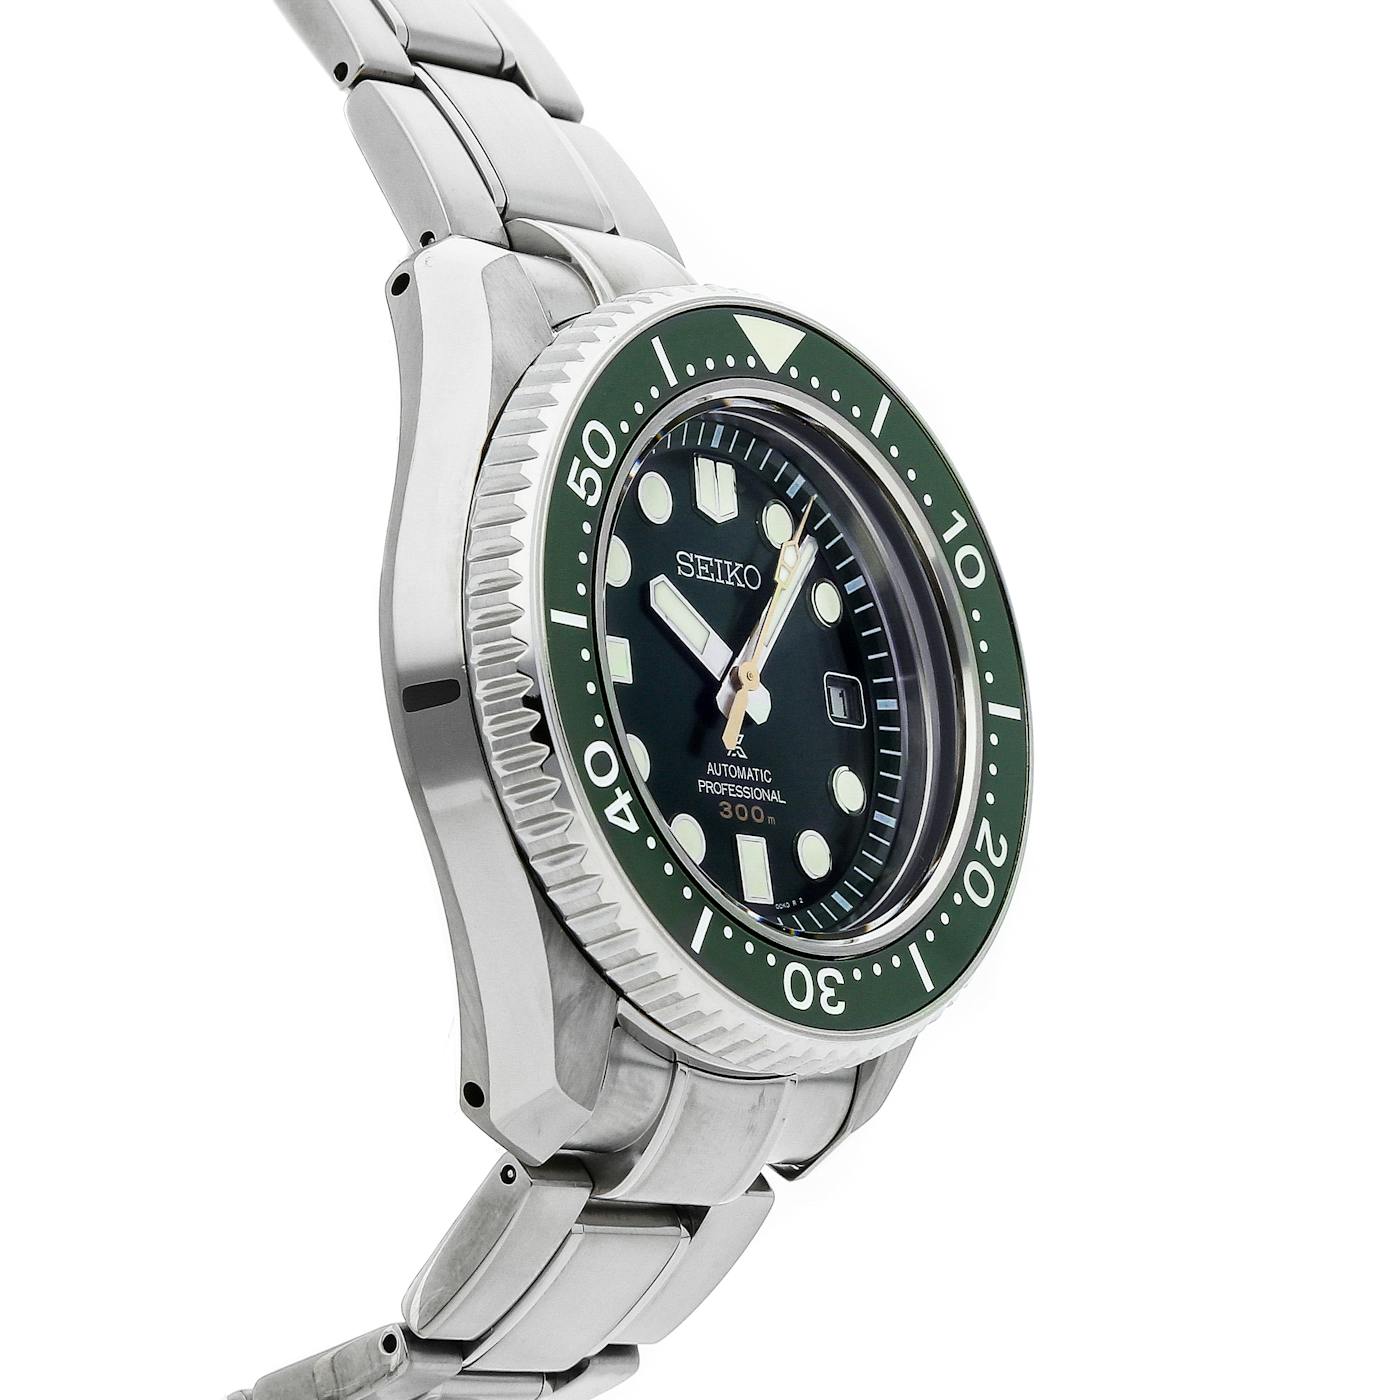 Pre-Owned Seiko Prospex Diver 300m Limited Edition SLA019 | WatchBox